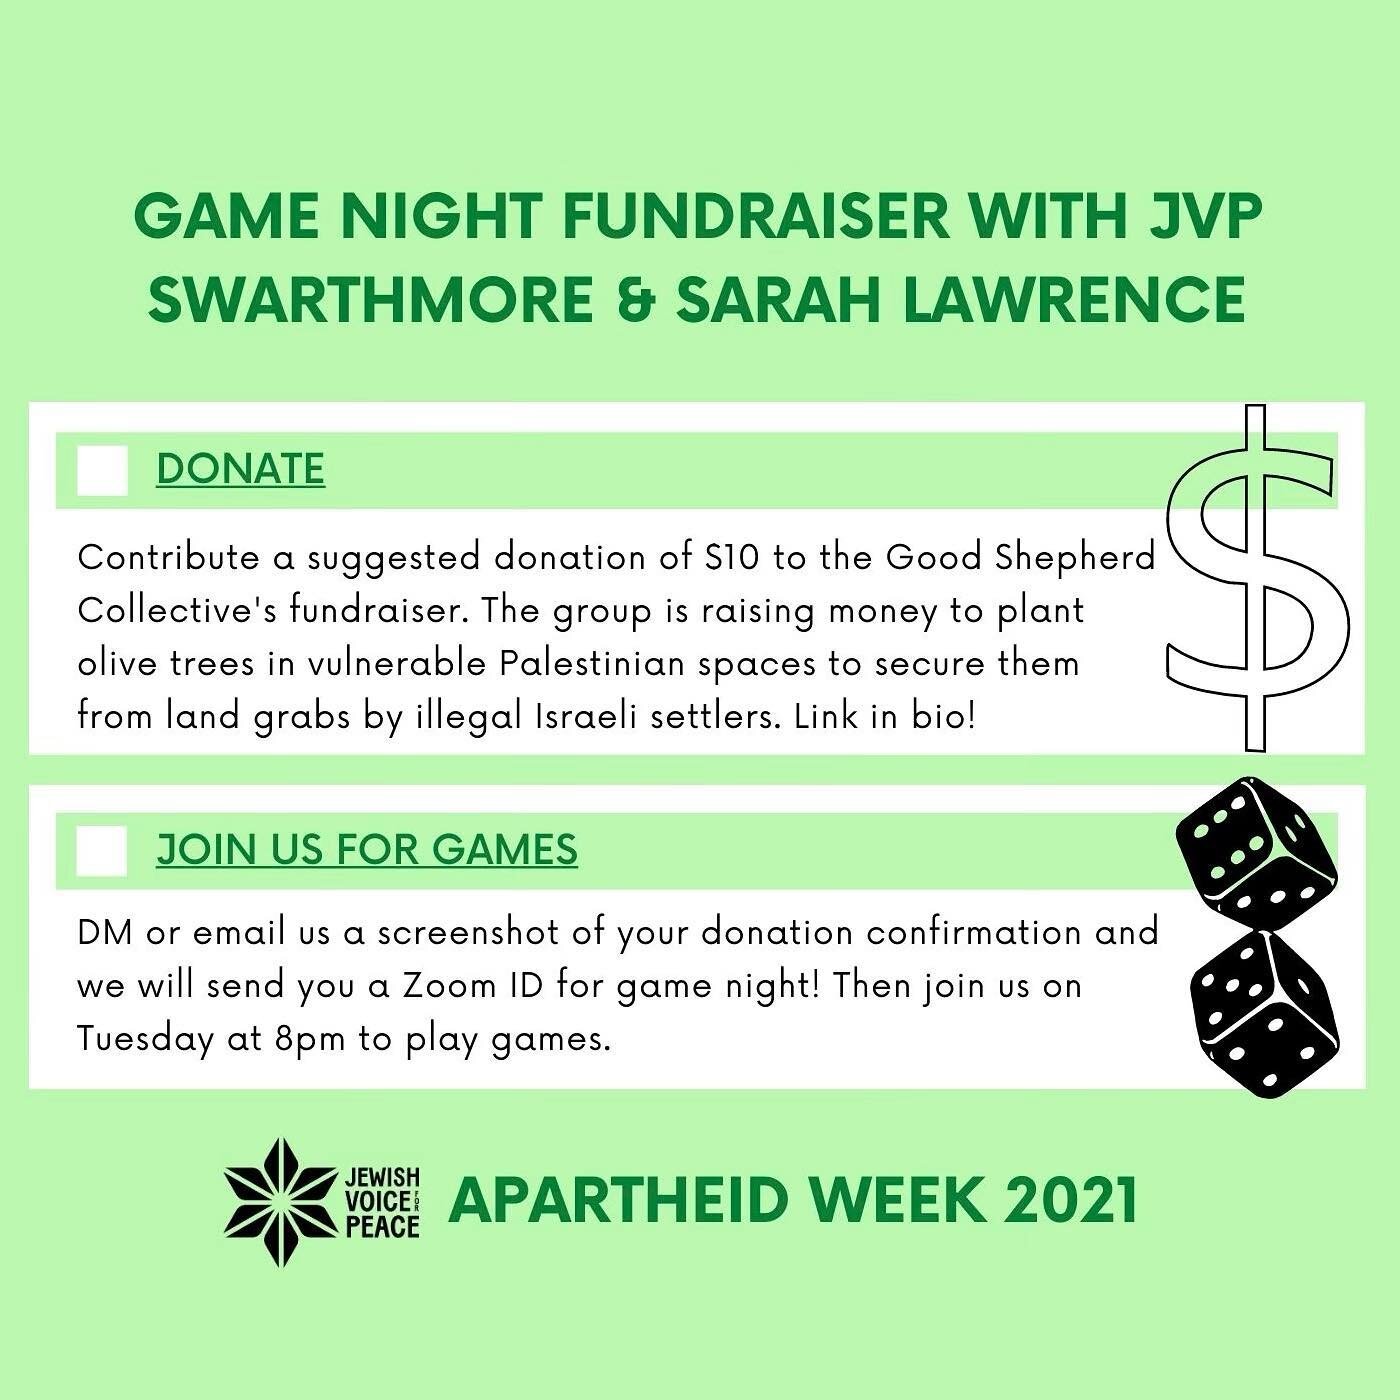 For this week&rsquo;s fundraiser, we are boosting @swarthmorejvp and @jvpslc&rsquo;s ongoing fundraiser for @goodshepherdcollective&rsquo;s olive tree planting project. Link in our bio to donate &mdash; and if you DM your donation confirmation to @sw